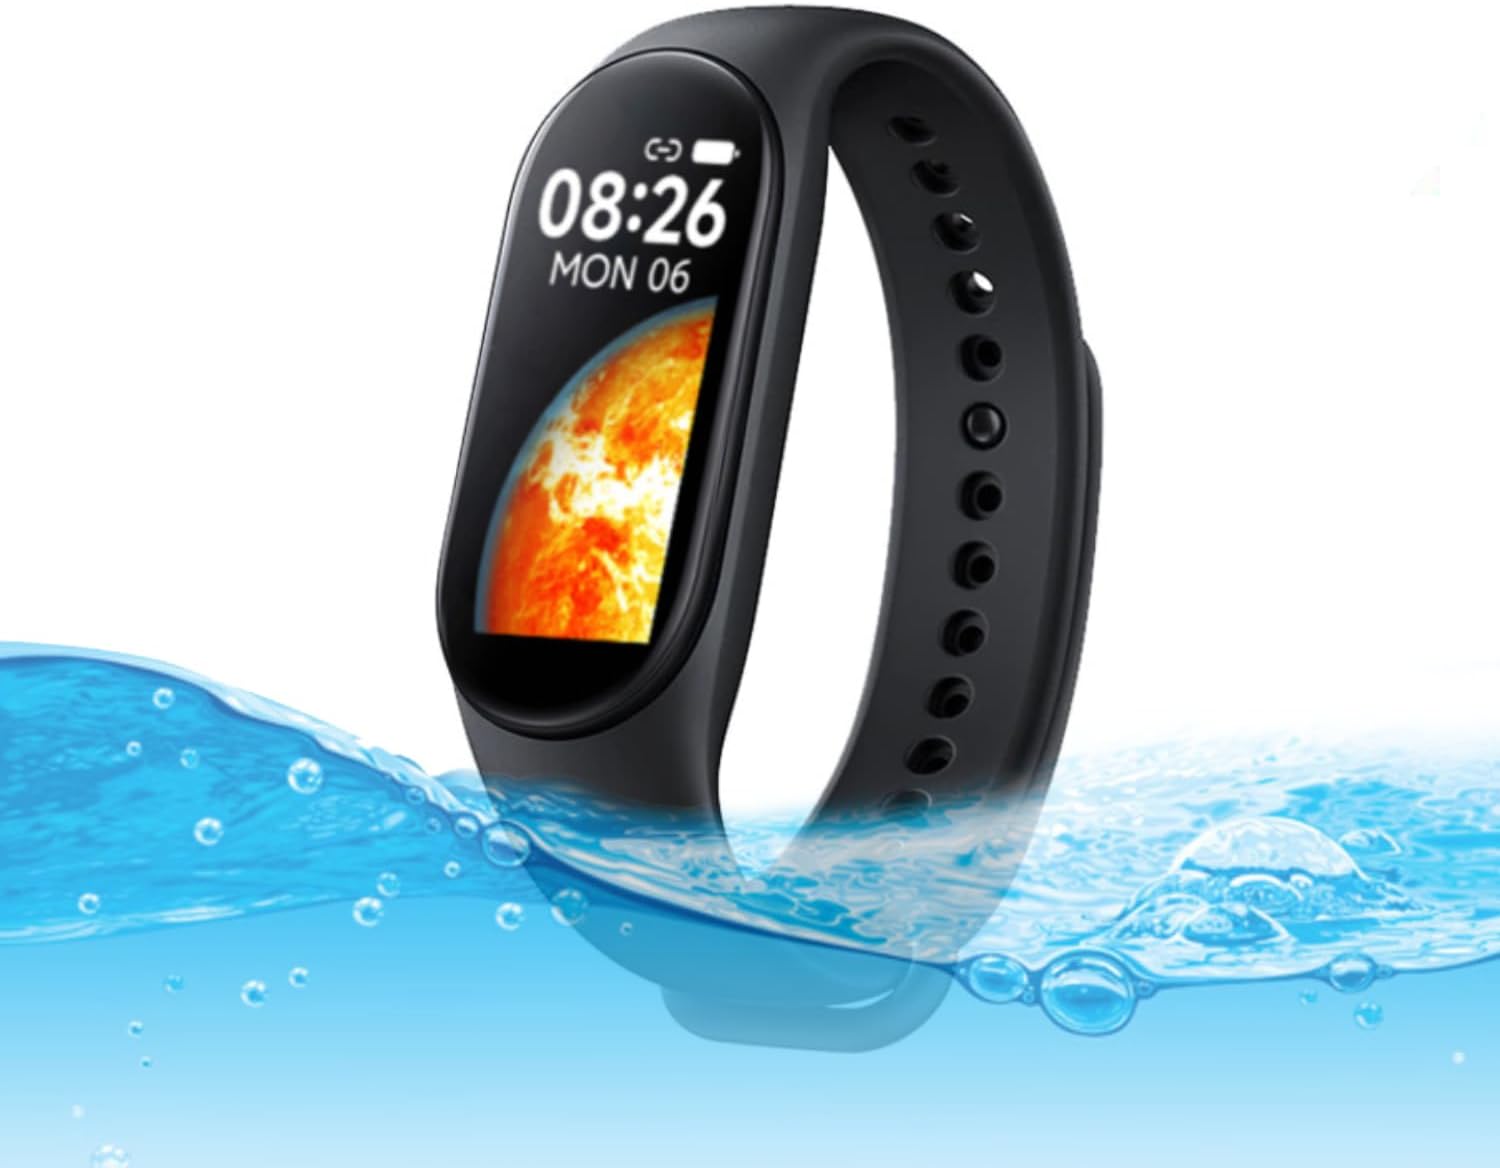 The Ultimate Fitness Tracker Waterproof Smart Watch: A Comprehensive Review